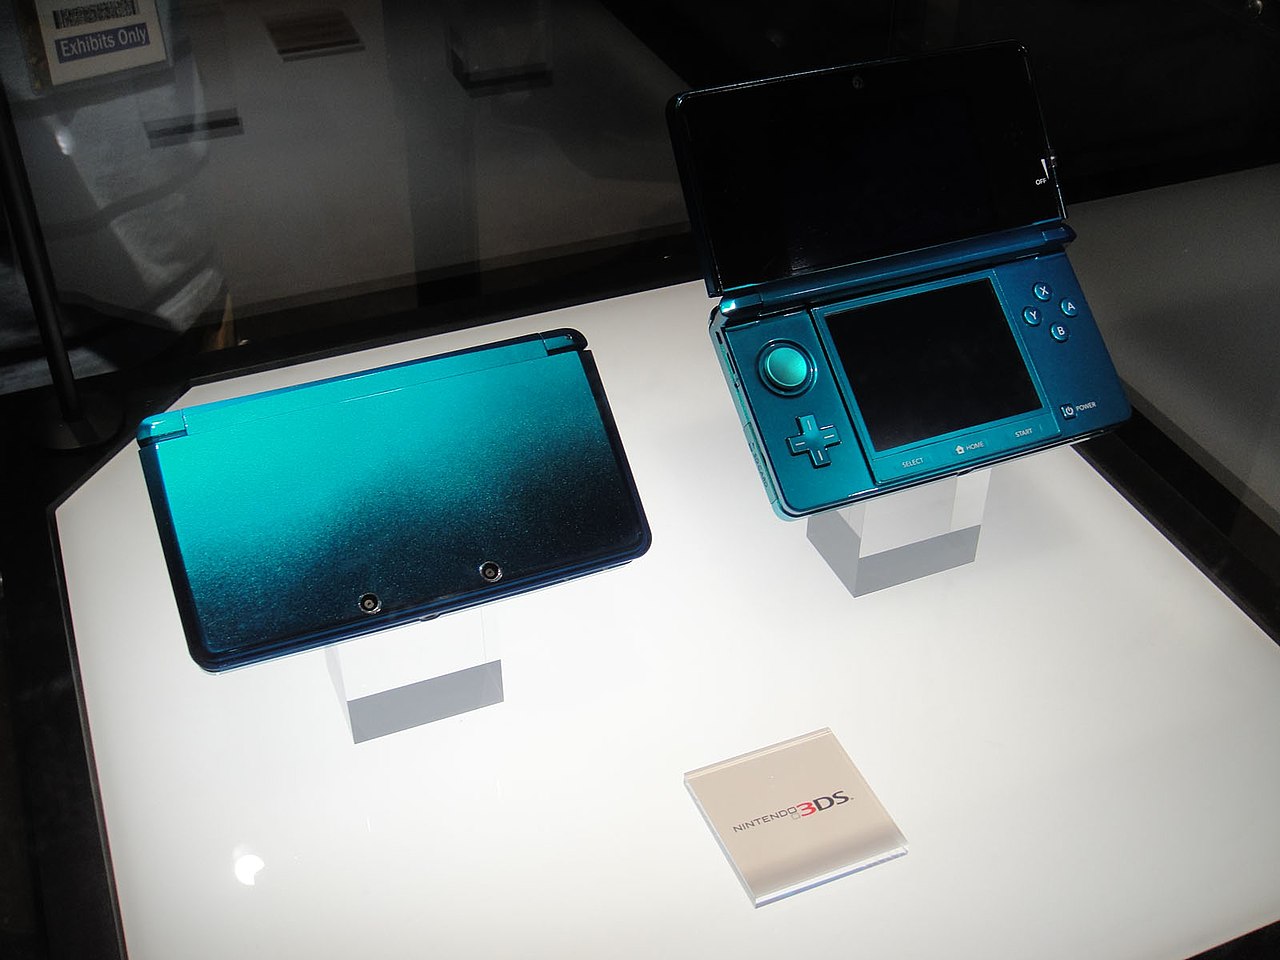 File:Nintendo 3DS display case at E3 2010 (front side angle).jpg 